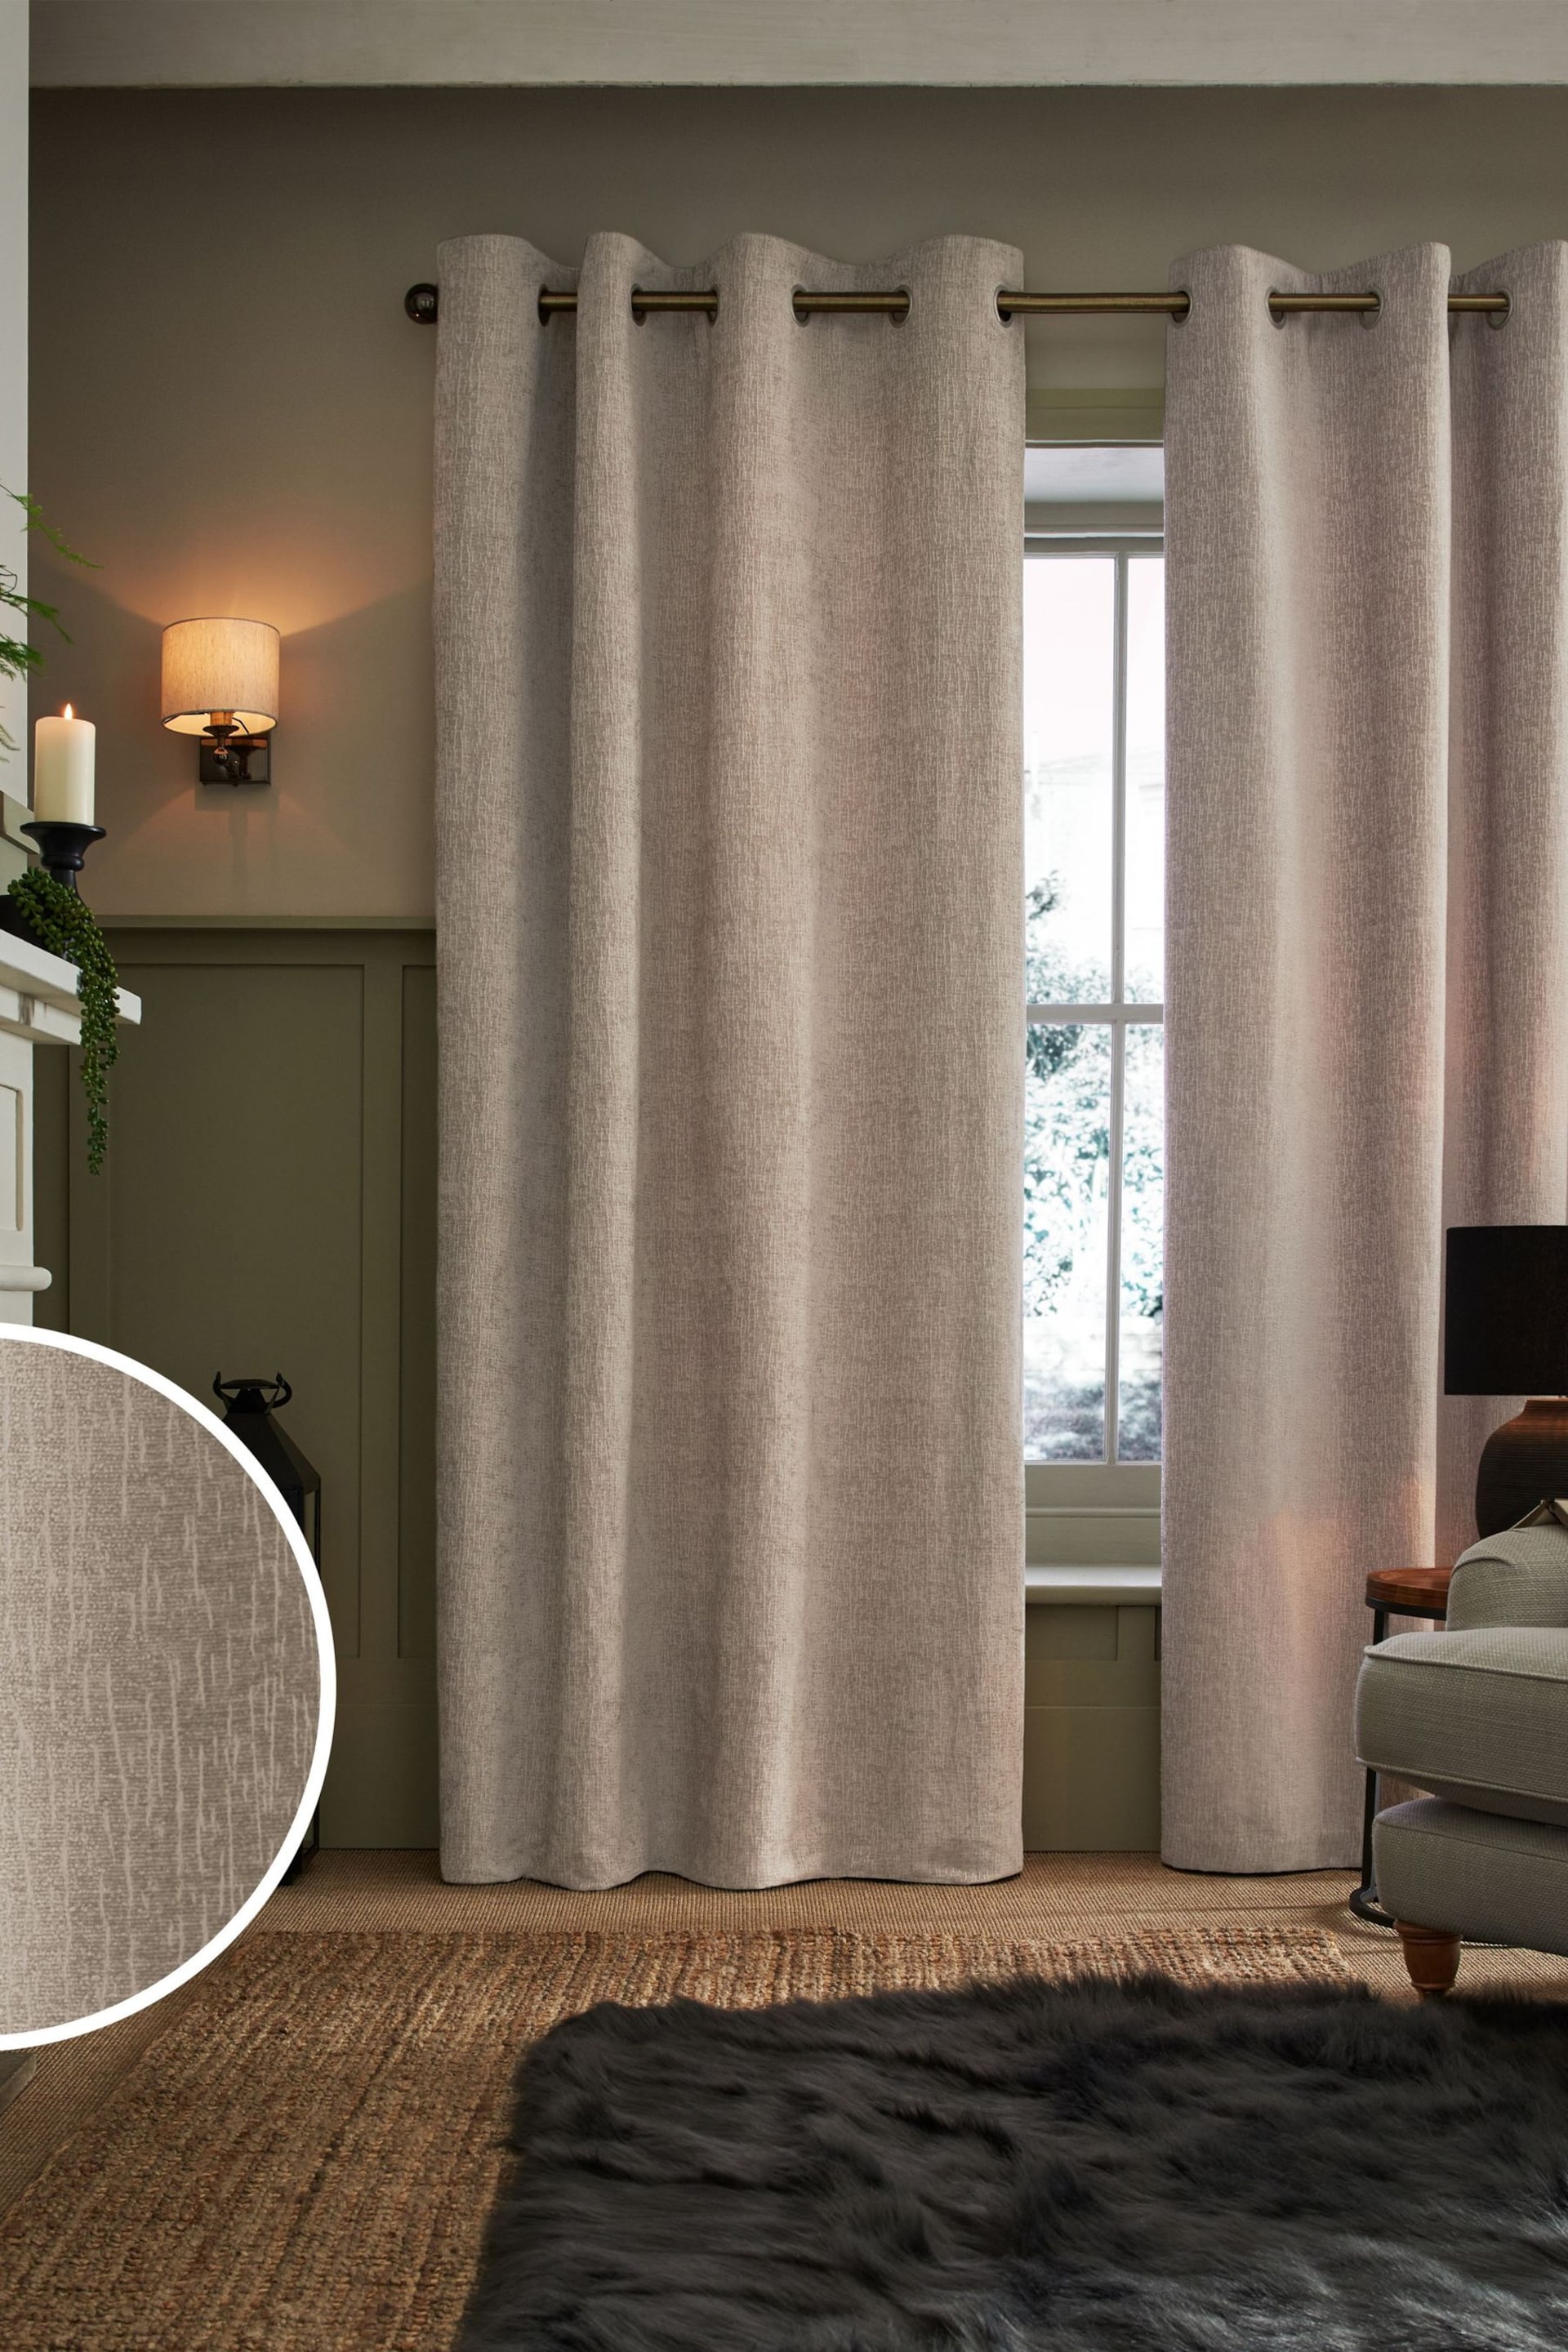 Natural Next Heavyweight Chenille Eyelet Super Thermal Curtains - Image 1 of 6